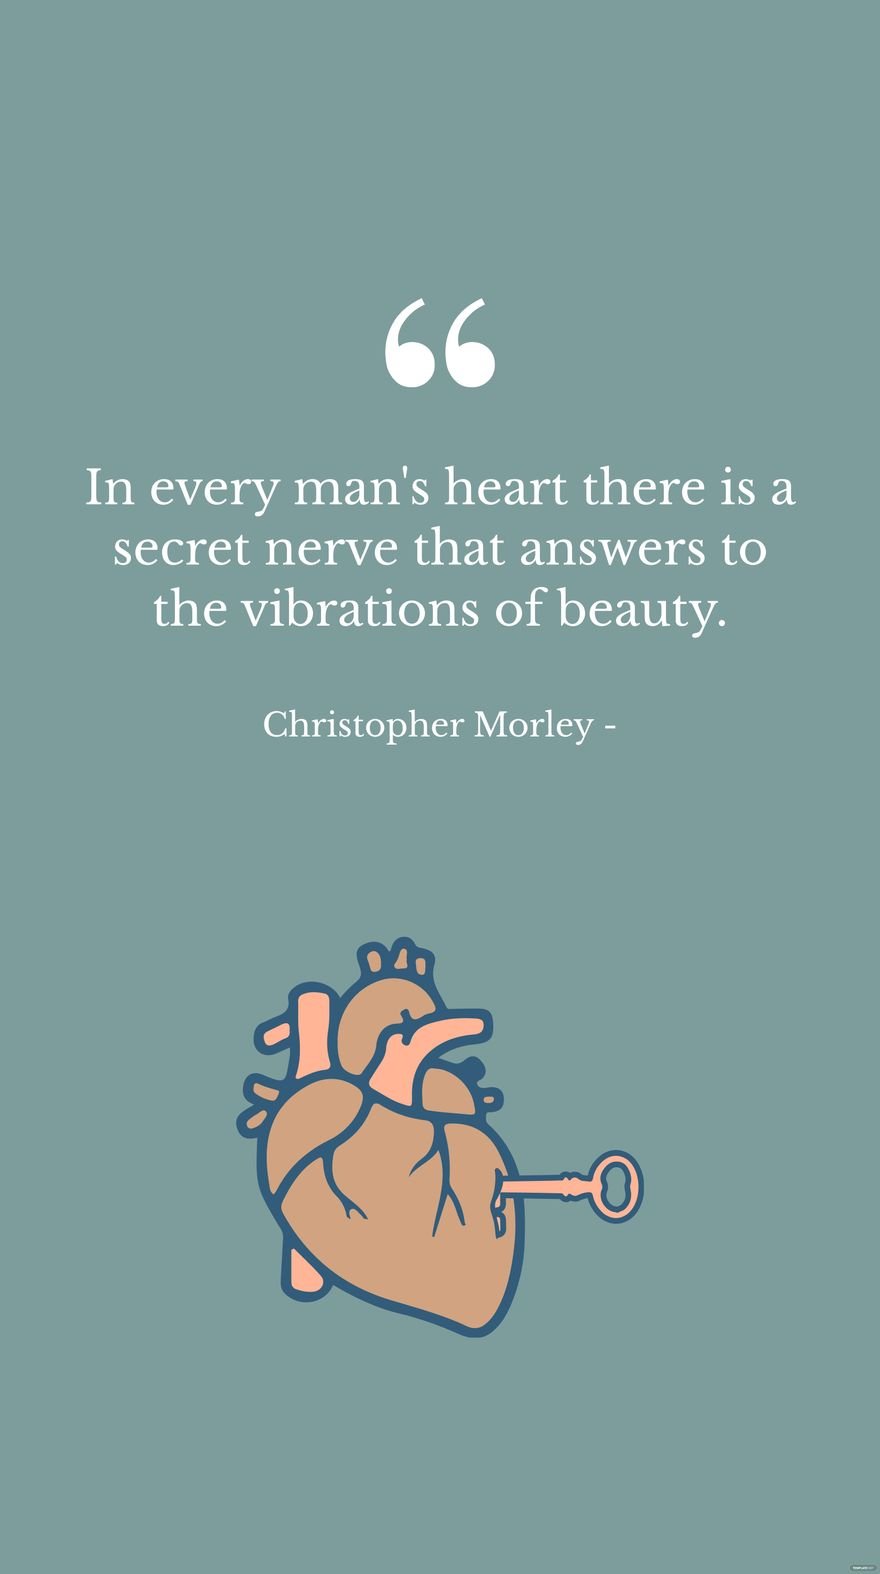 Free Christopher Morley - In every man's heart there is a secret nerve that answers to the vibrations of beauty.